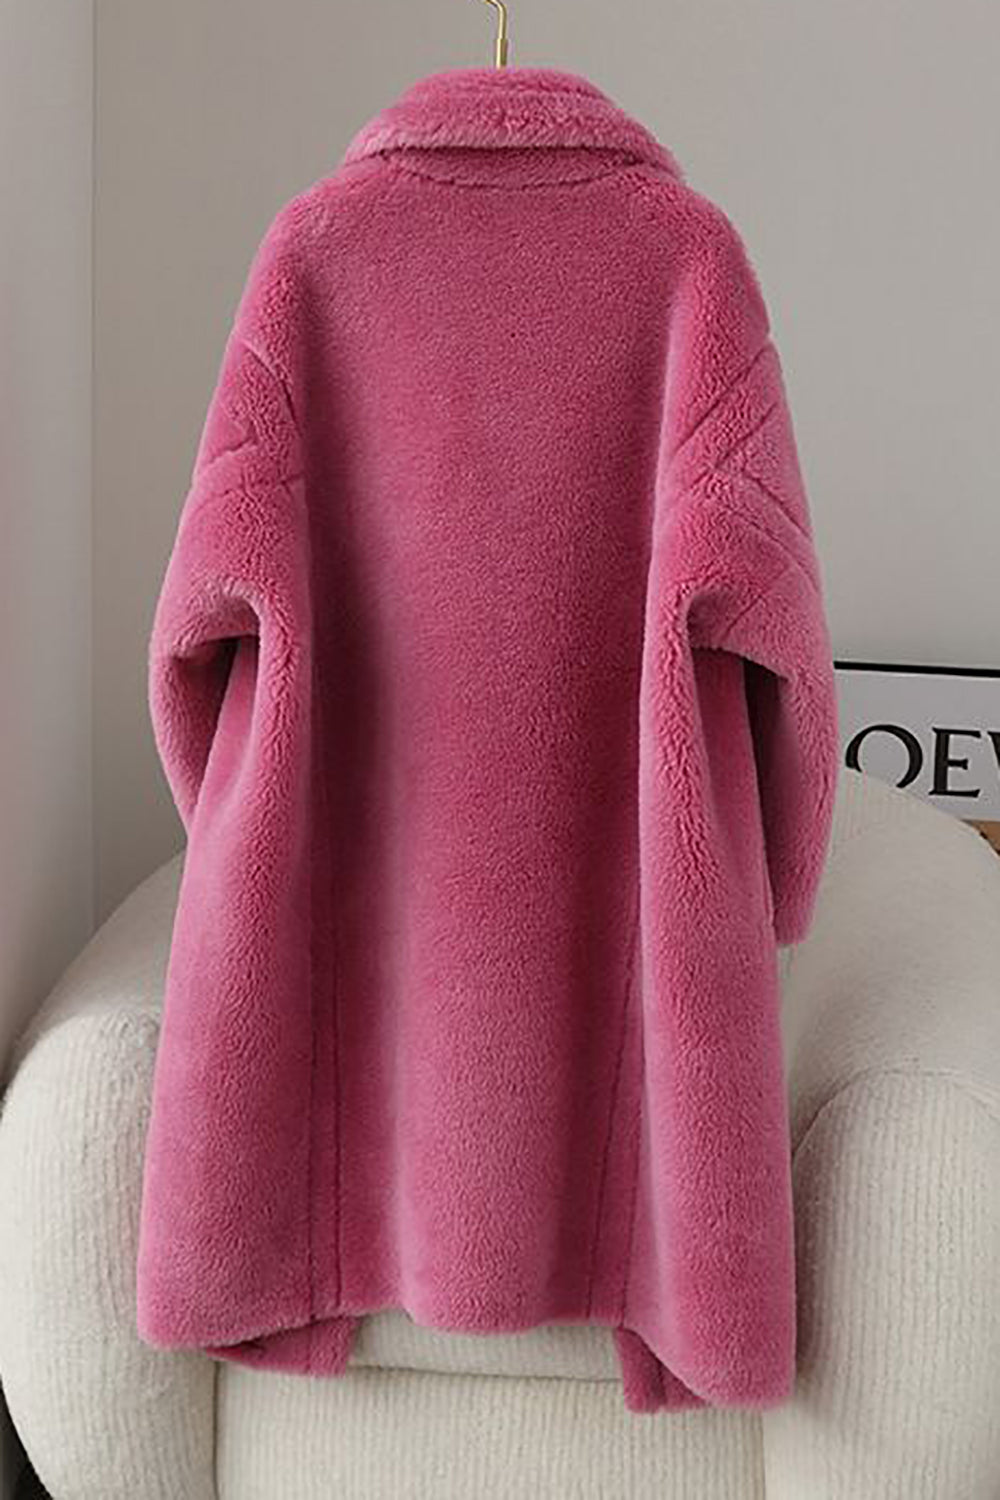 Brown Notched Lapel Long Teddy Wool coat